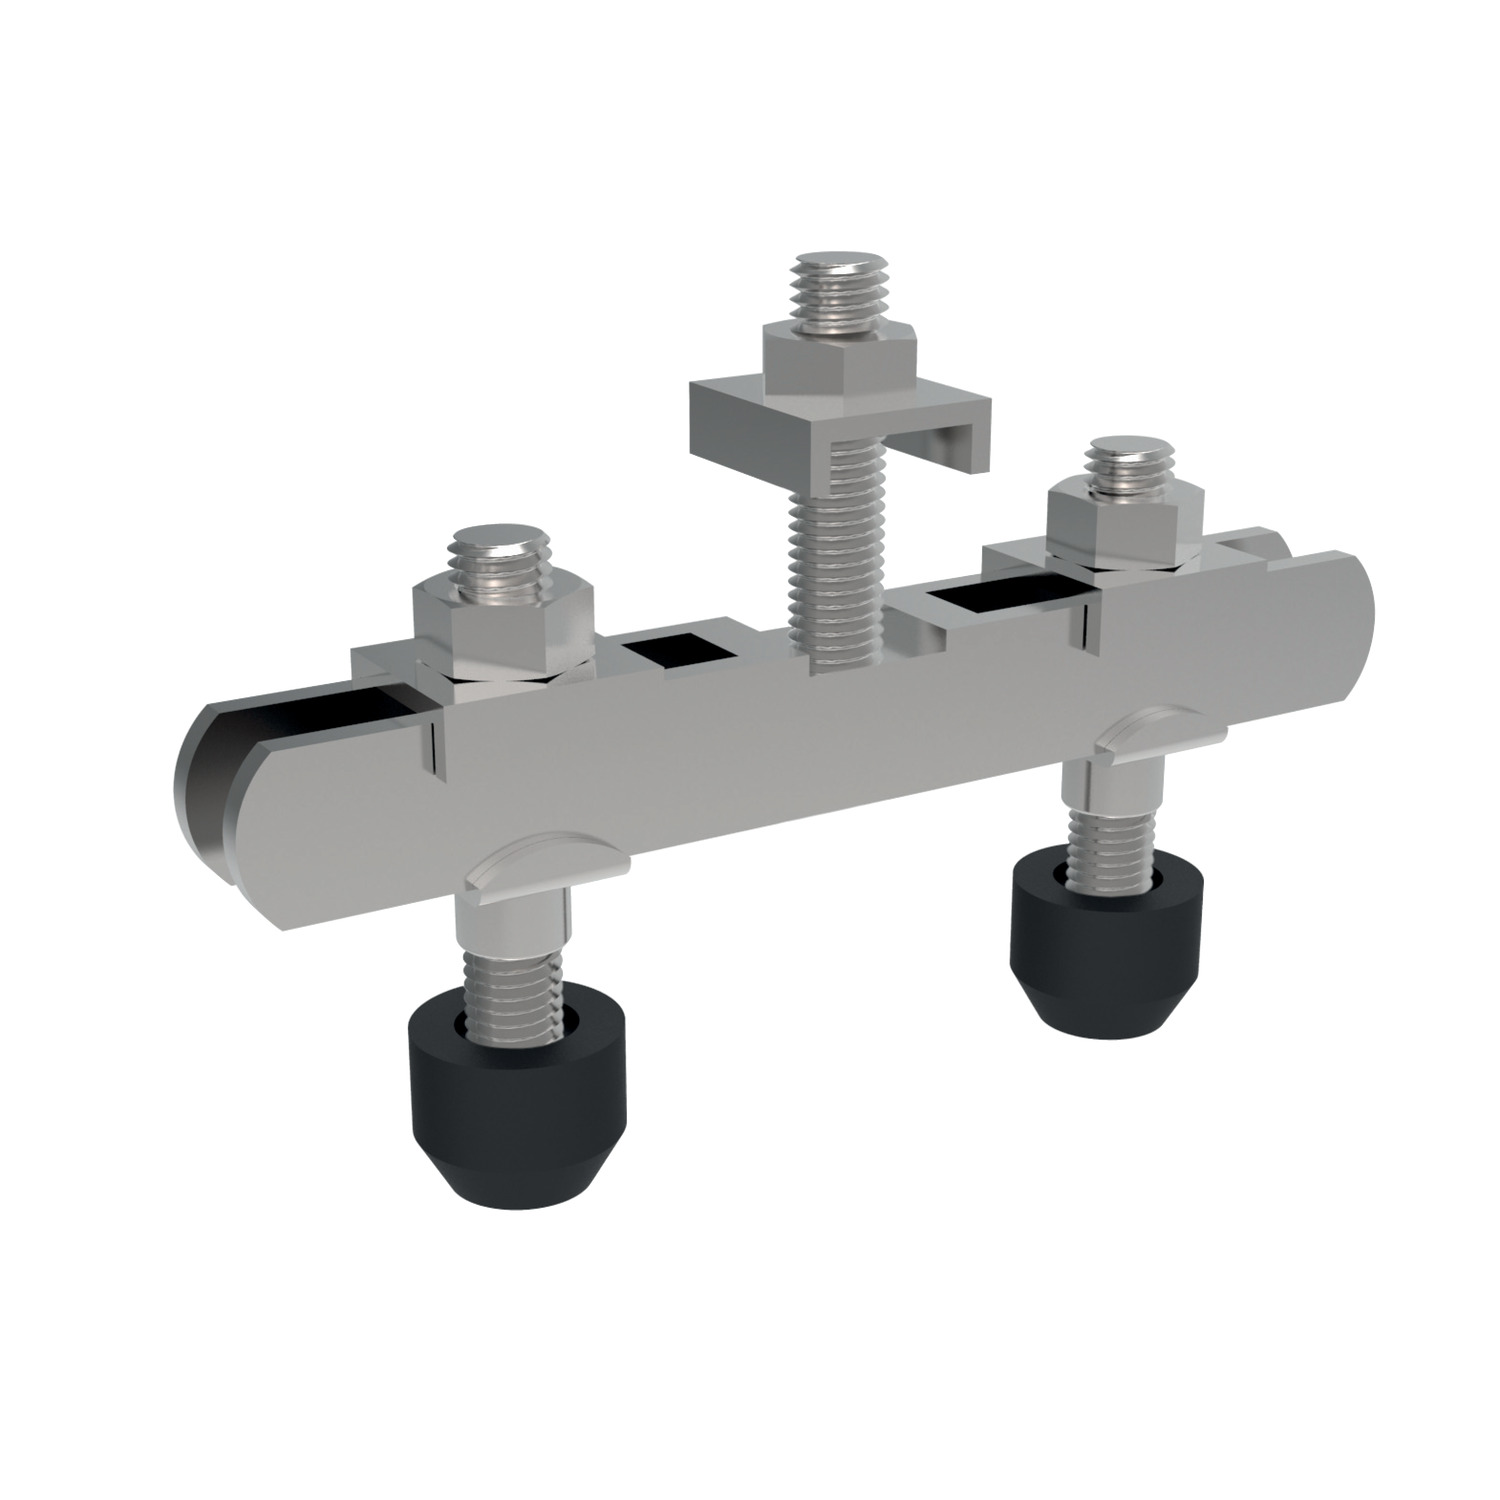 Product 45000, Supporting Arms for toggle clamps / 